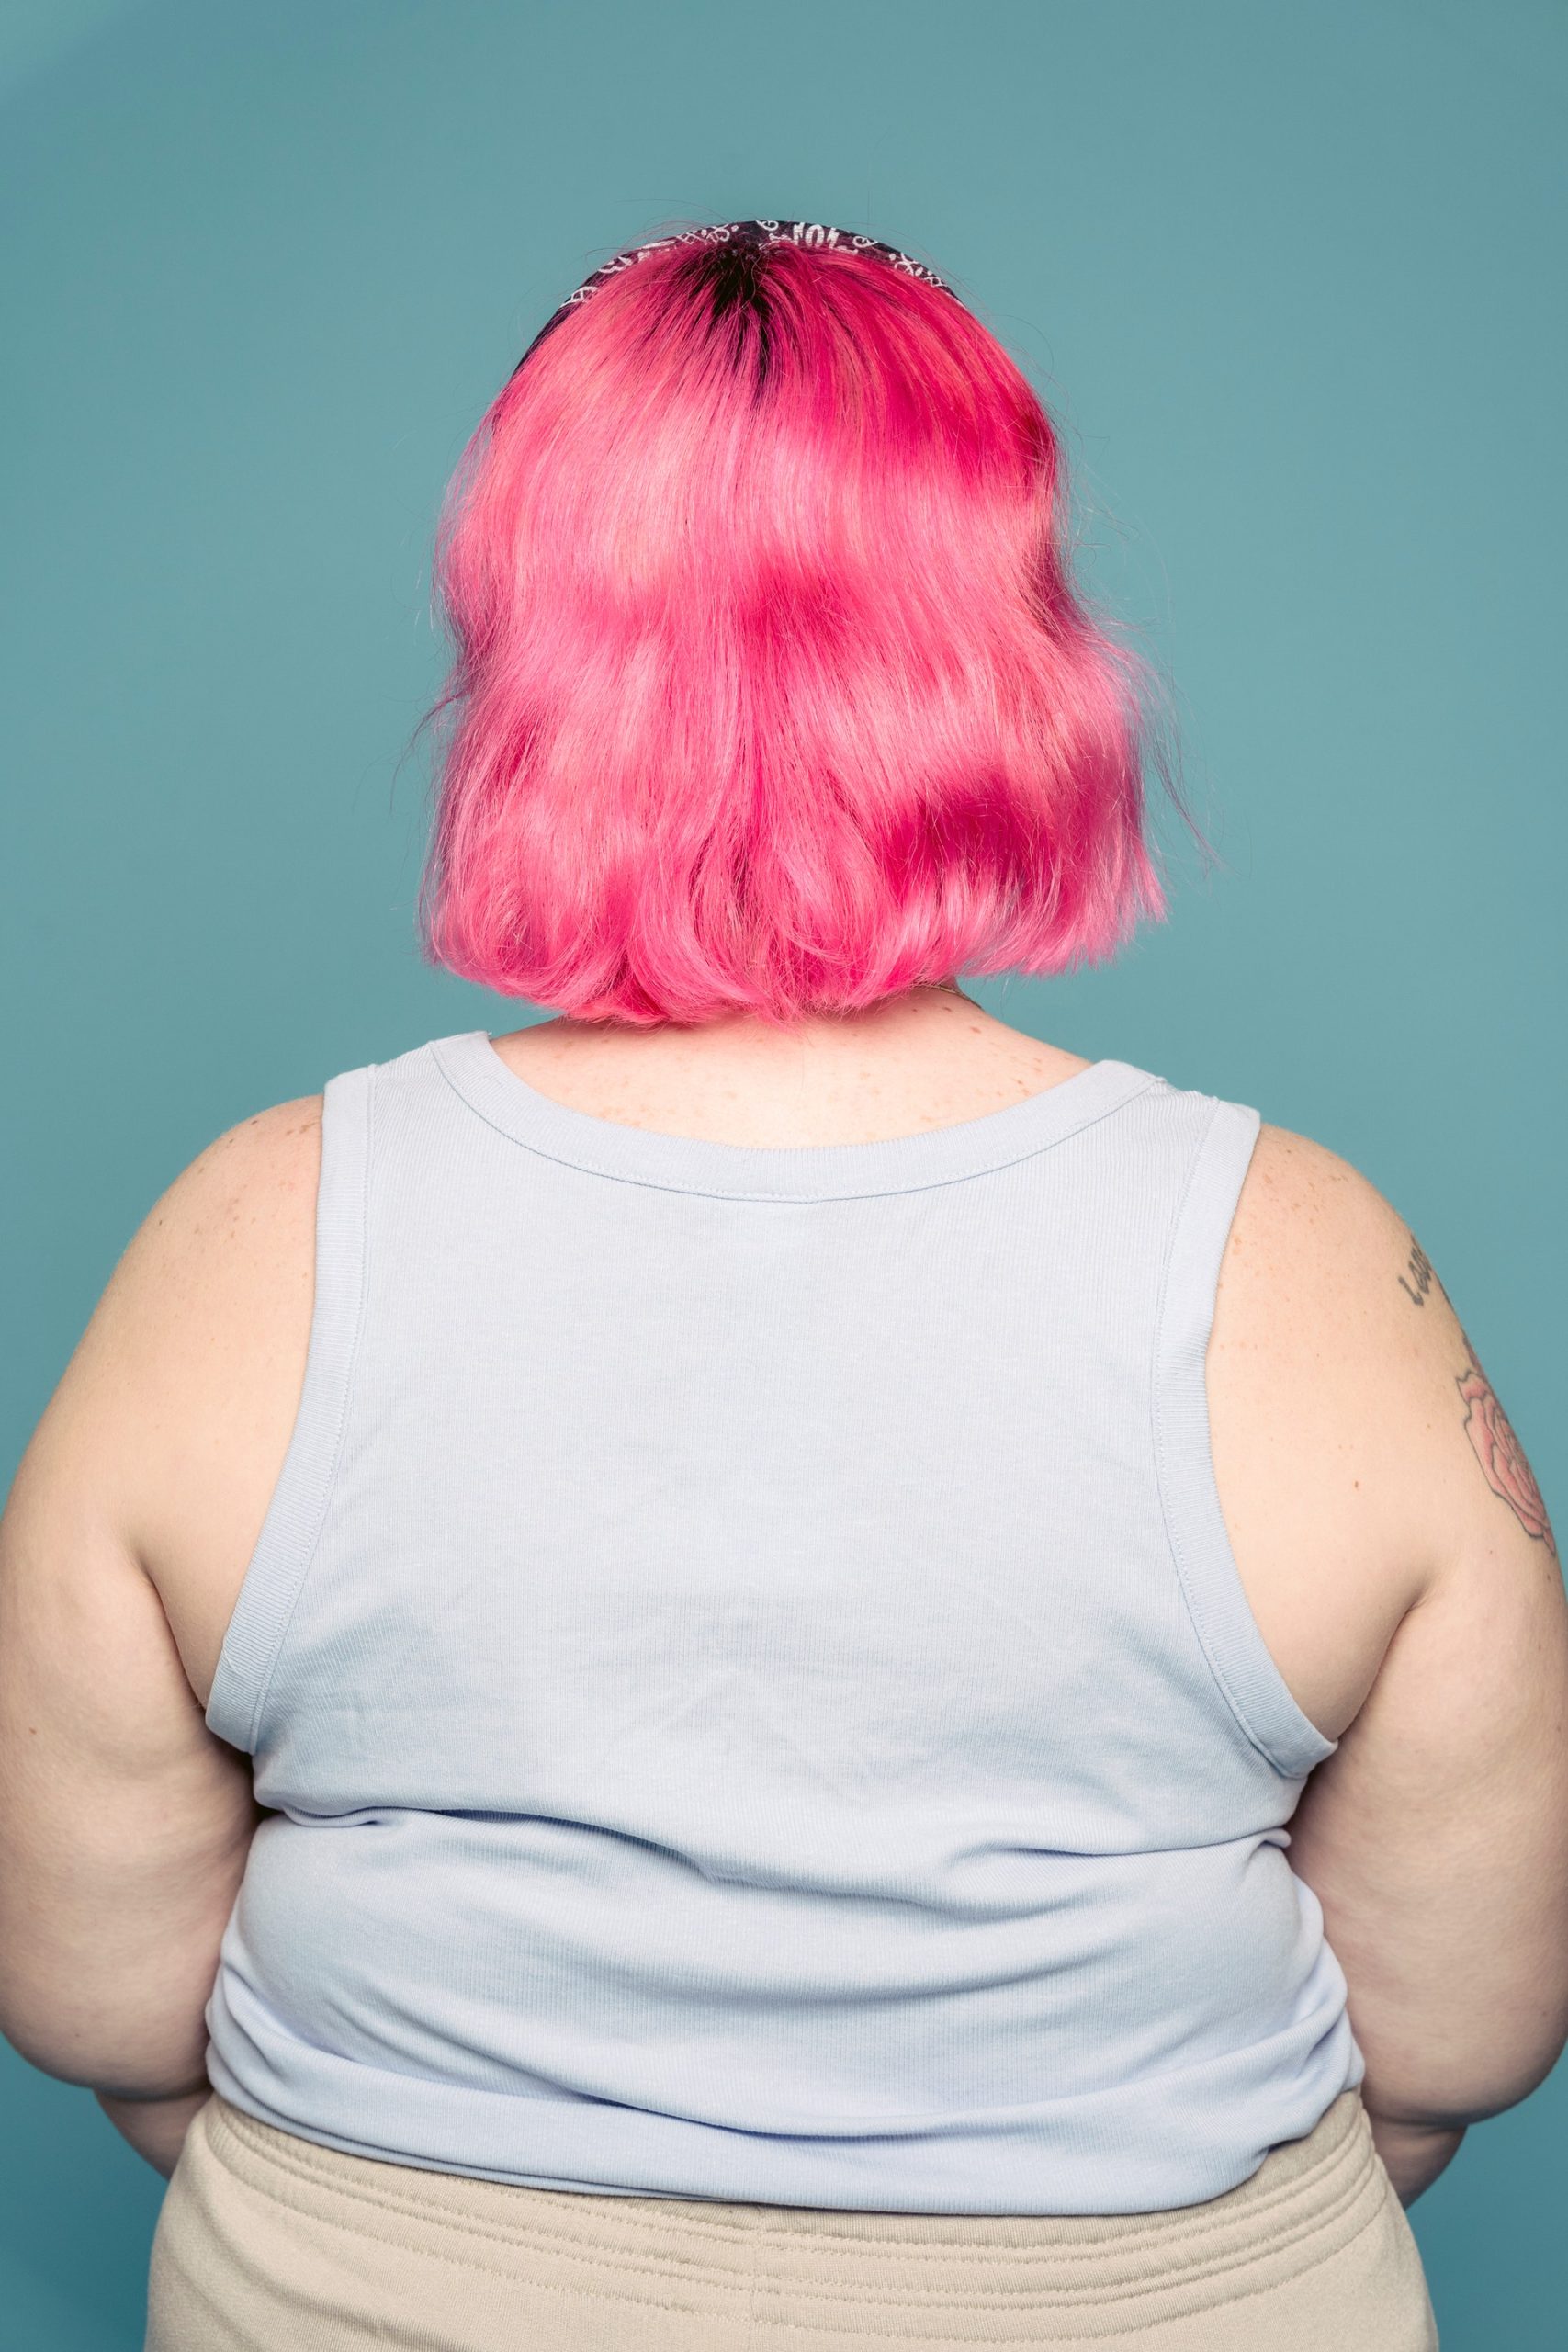 A woman with pink hair on her back